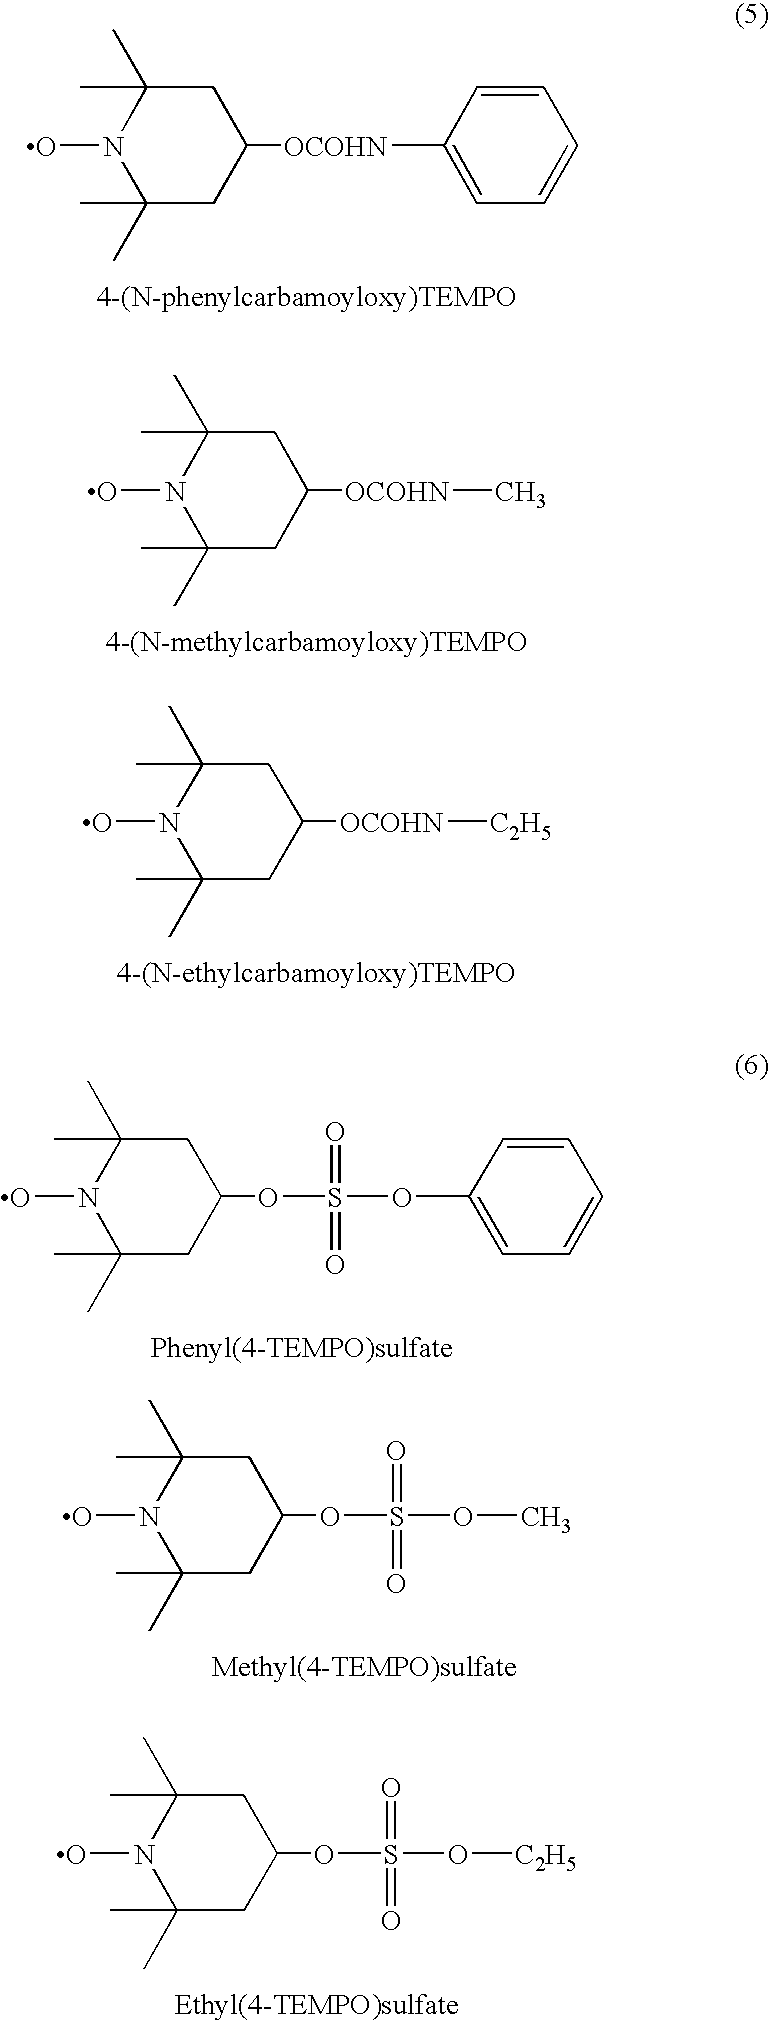 Modified diene-based rubber and rubber composition containing the same